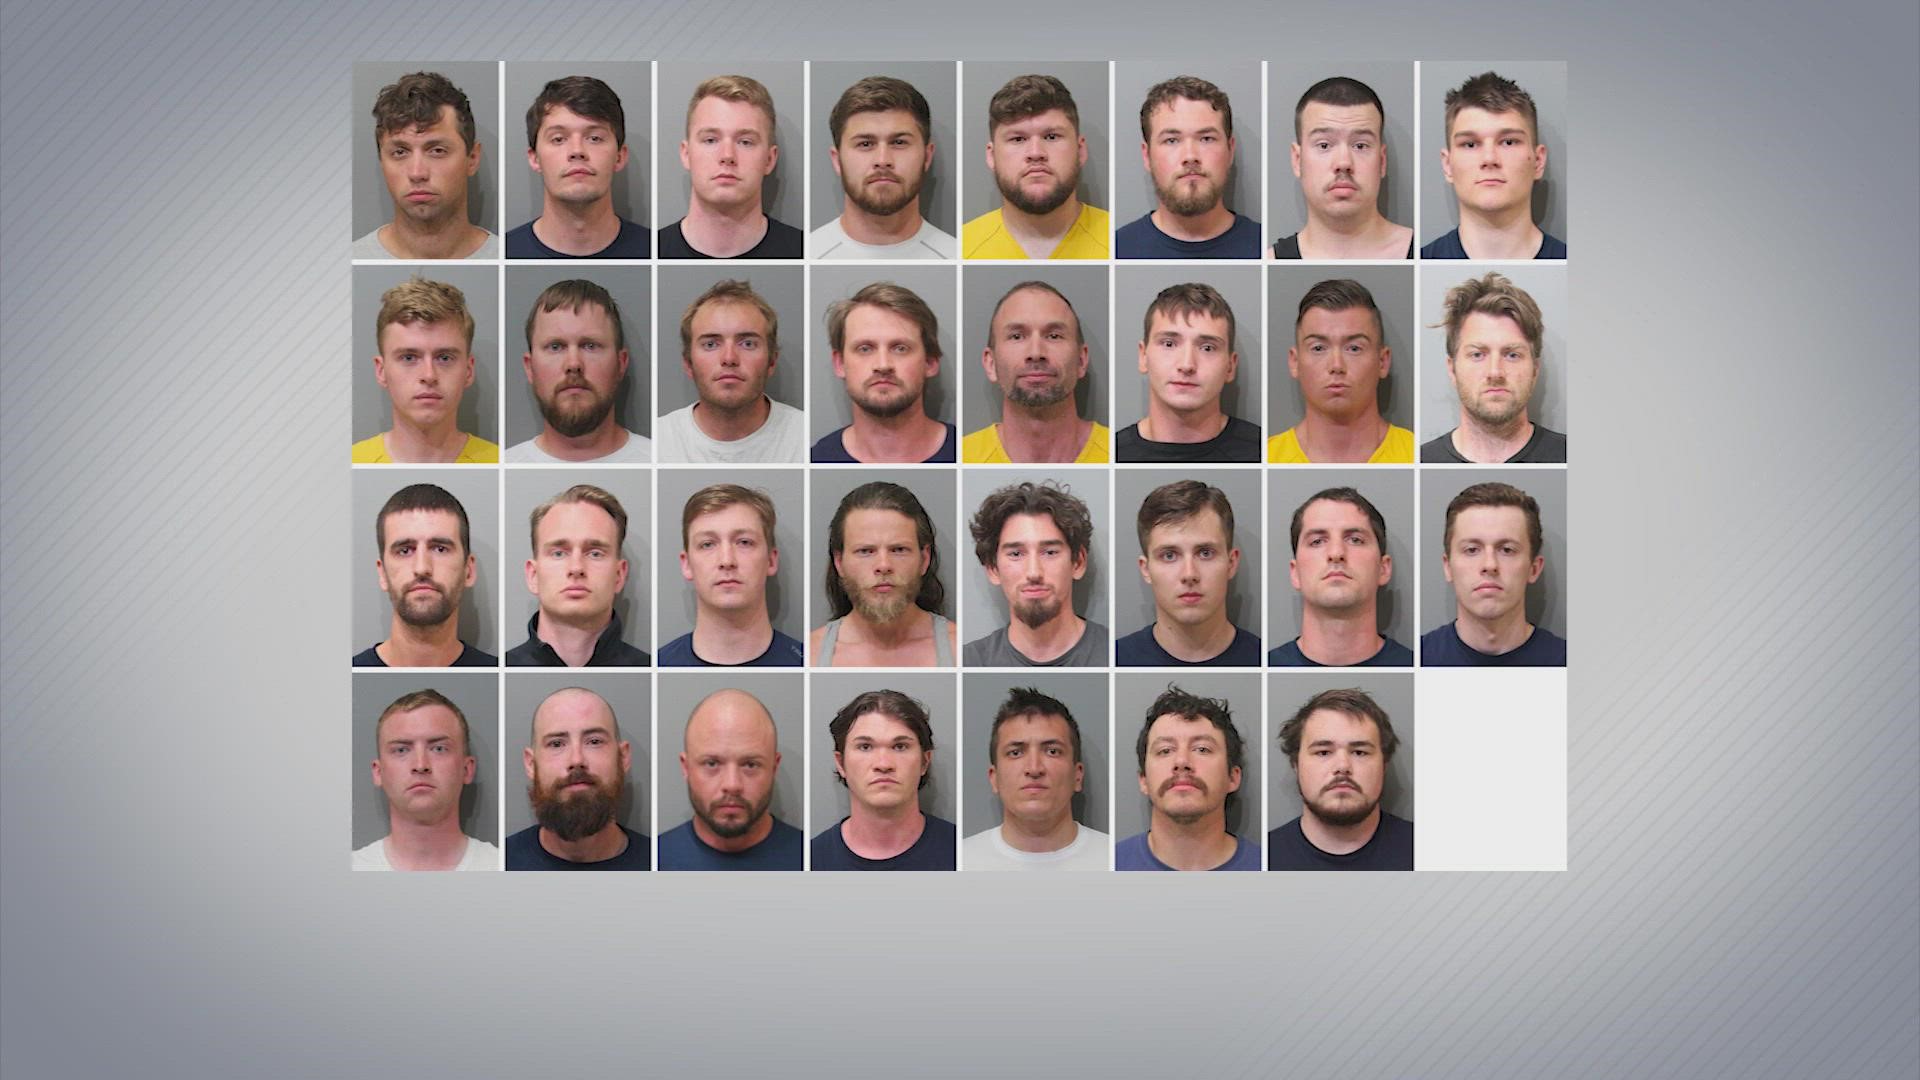 The 31 Patriot Front members were arrested with riot gear after a tipster reported seeing people loading up into a U-Haul like “a little army.”